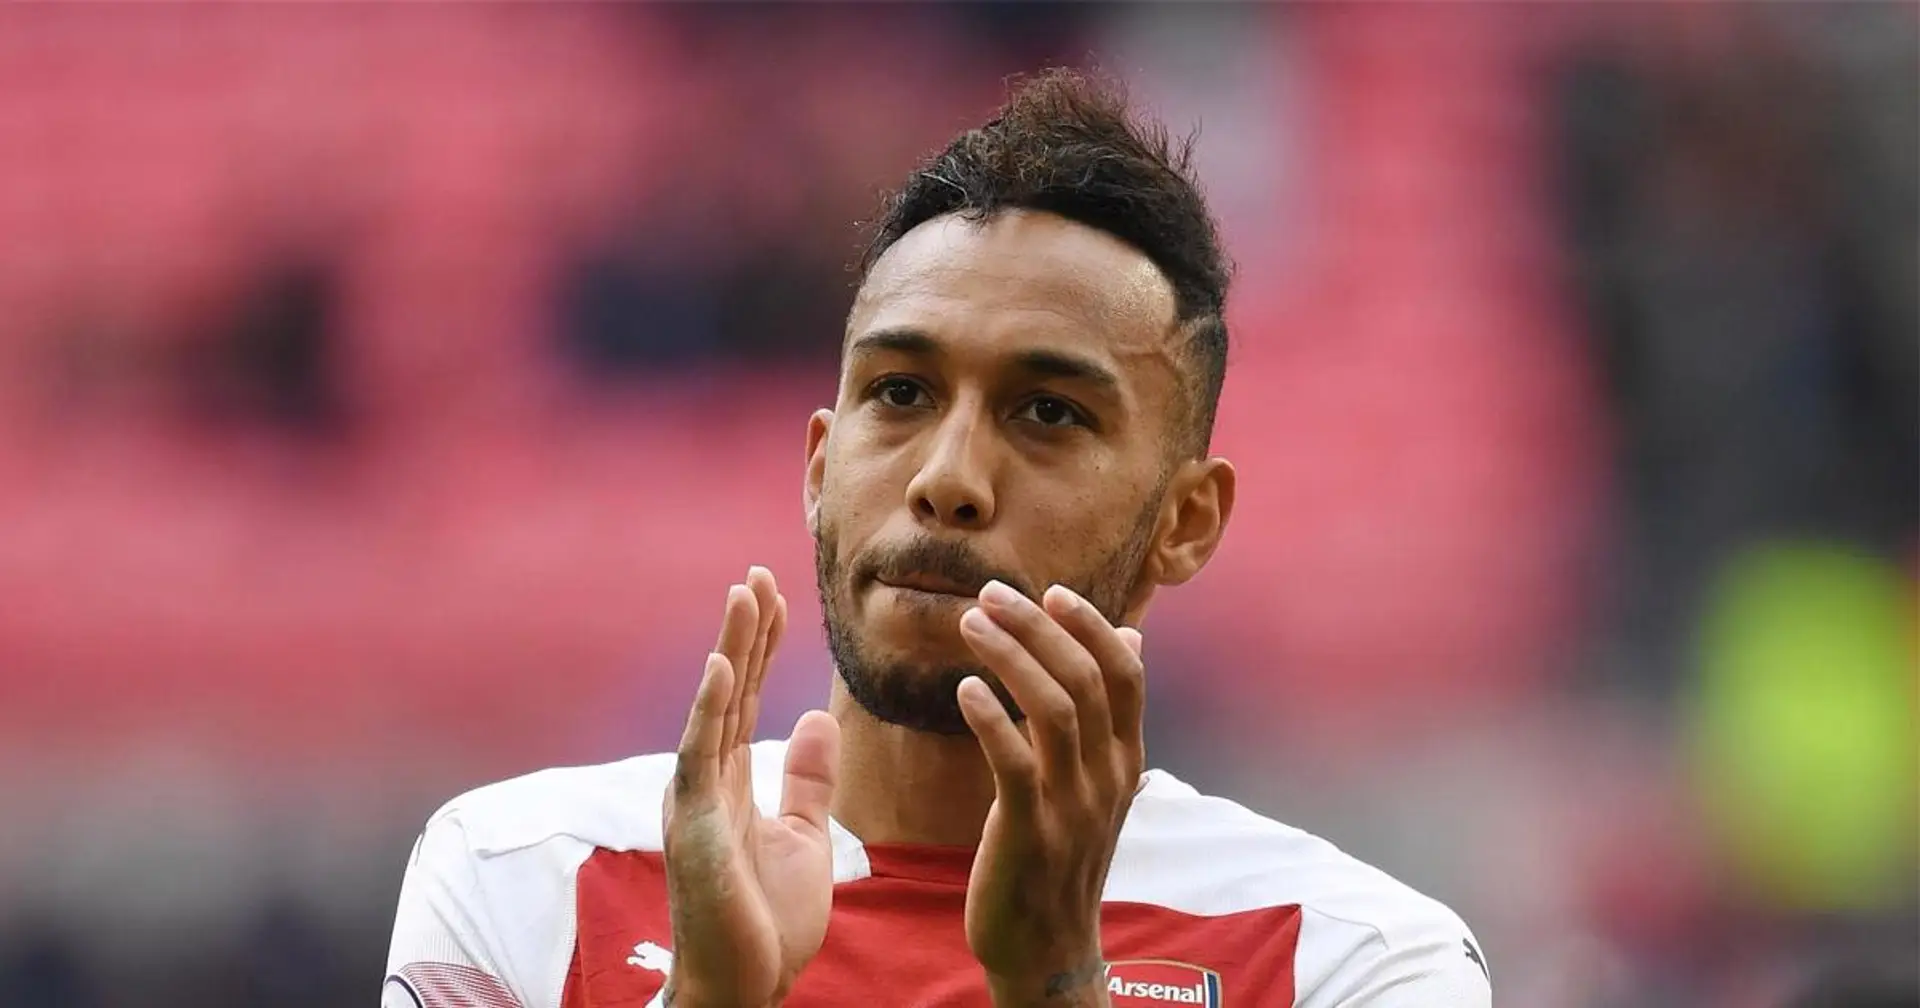 Joint best at Arsenal, 31st in Prem & more: Aubameyang's current market value in 7 facts